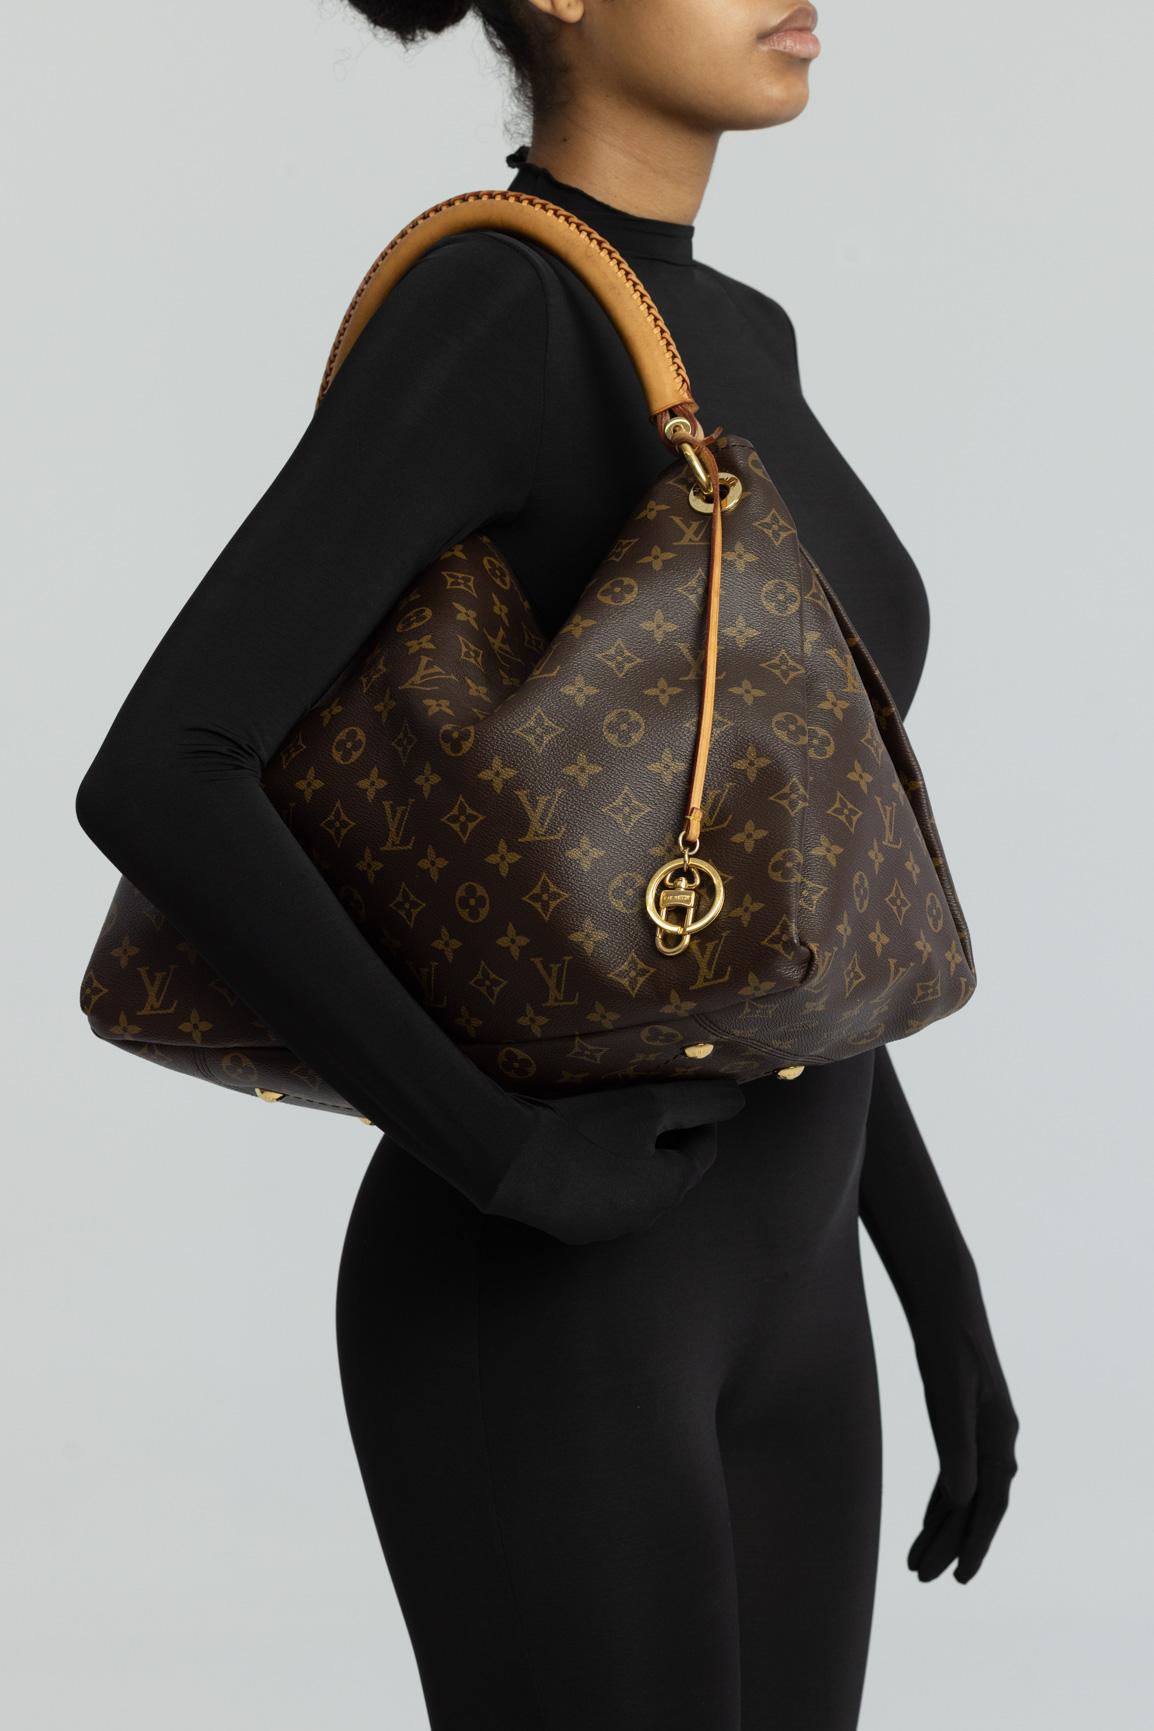 Louis Vuitton Monogram Artsy Mm Hobo Bag In Good Condition For Sale In Montreal, Quebec